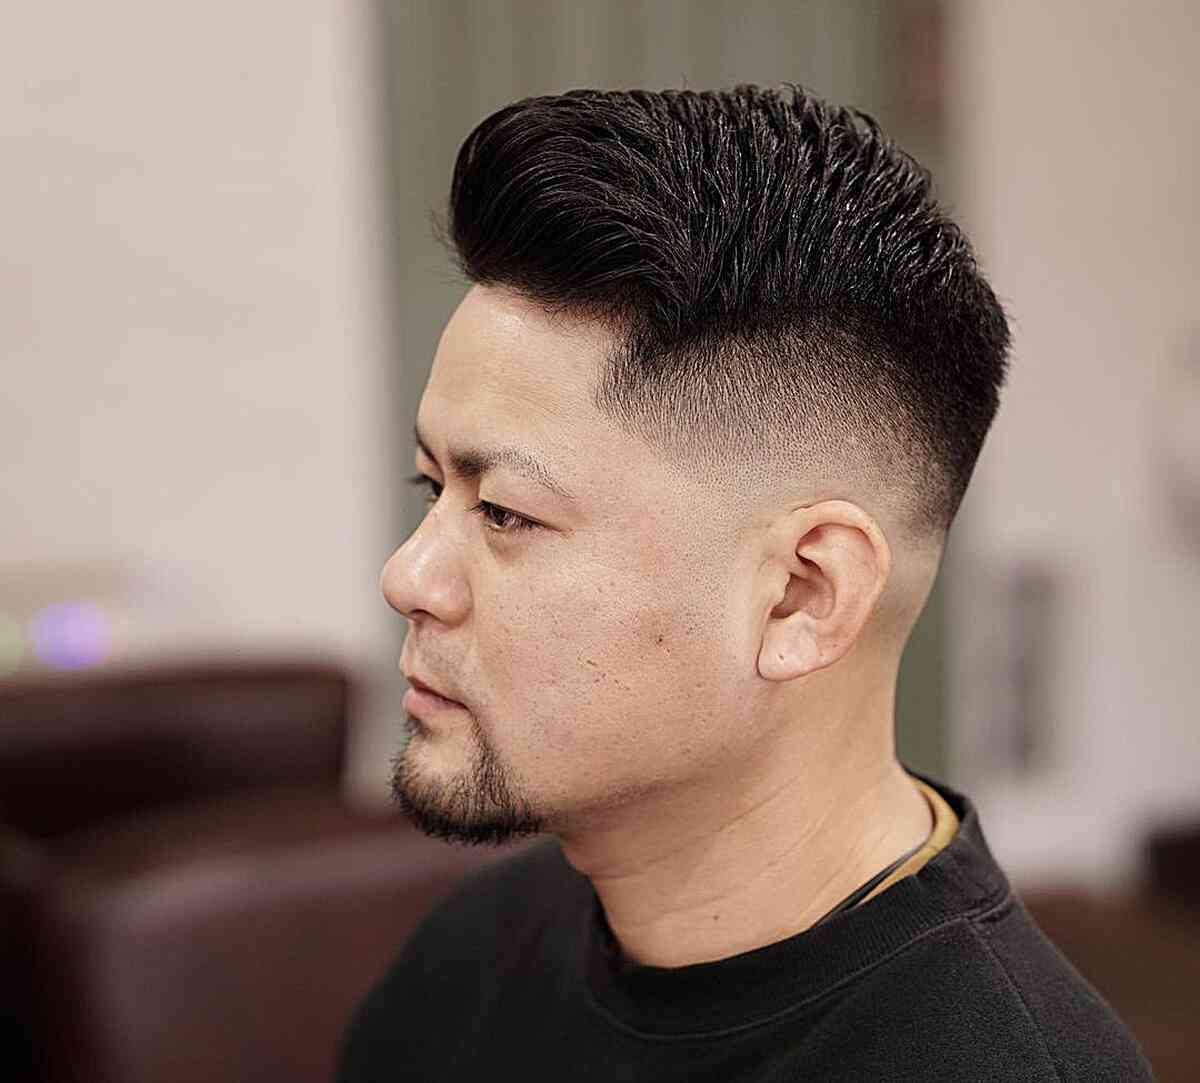 Swept Crew Cut Style with Shorter Sides and Bald Fade for Thick Hair